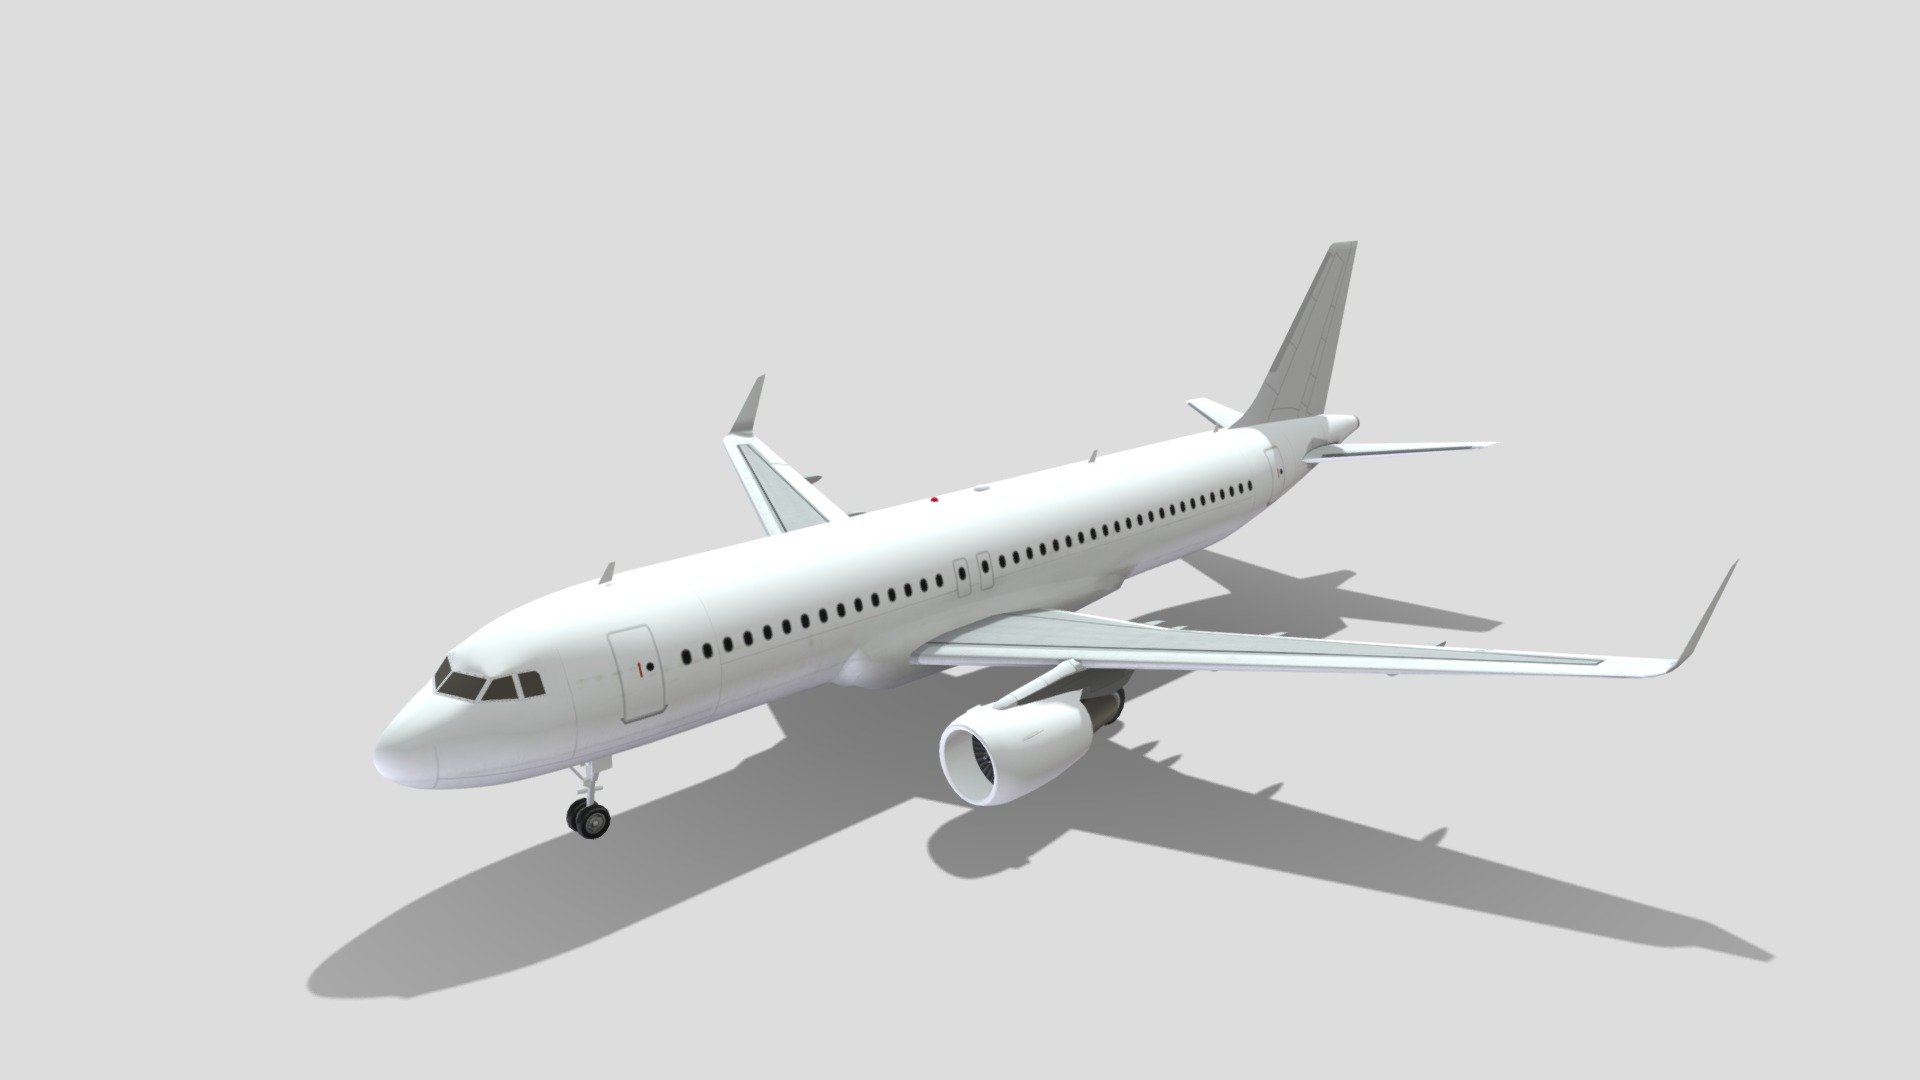 This is a meticulously crafted 3D low-poly model of a Airbus A320 winglets, optimized for minimal complexity with less than 5000 polygons. Despite its low polygon count, the model accurately captures the iconic design and aerodynamic features of the Airbus A320 winglets, making it ideal for real-time rendering in games or simulations.
The model comes with a blank layered texture, providing a clean slate for customization. This allows you to apply your own color schemes, decals, or airline branding. The layered structure of the texture file offers flexibility in modifying different parts of the aircraft separately, such as the fuselage, wings, engines, and tail.
In summary, this Airbus A320 winglets low-poly model is a perfect blend of simplicity, accuracy, and customizability, making it a versatile asset for any 3D project.

non PBR .psd blank texture/ albedo only - Airbus A320 winglets - Buy Royalty Free 3D model by hangarcerouno 3d model